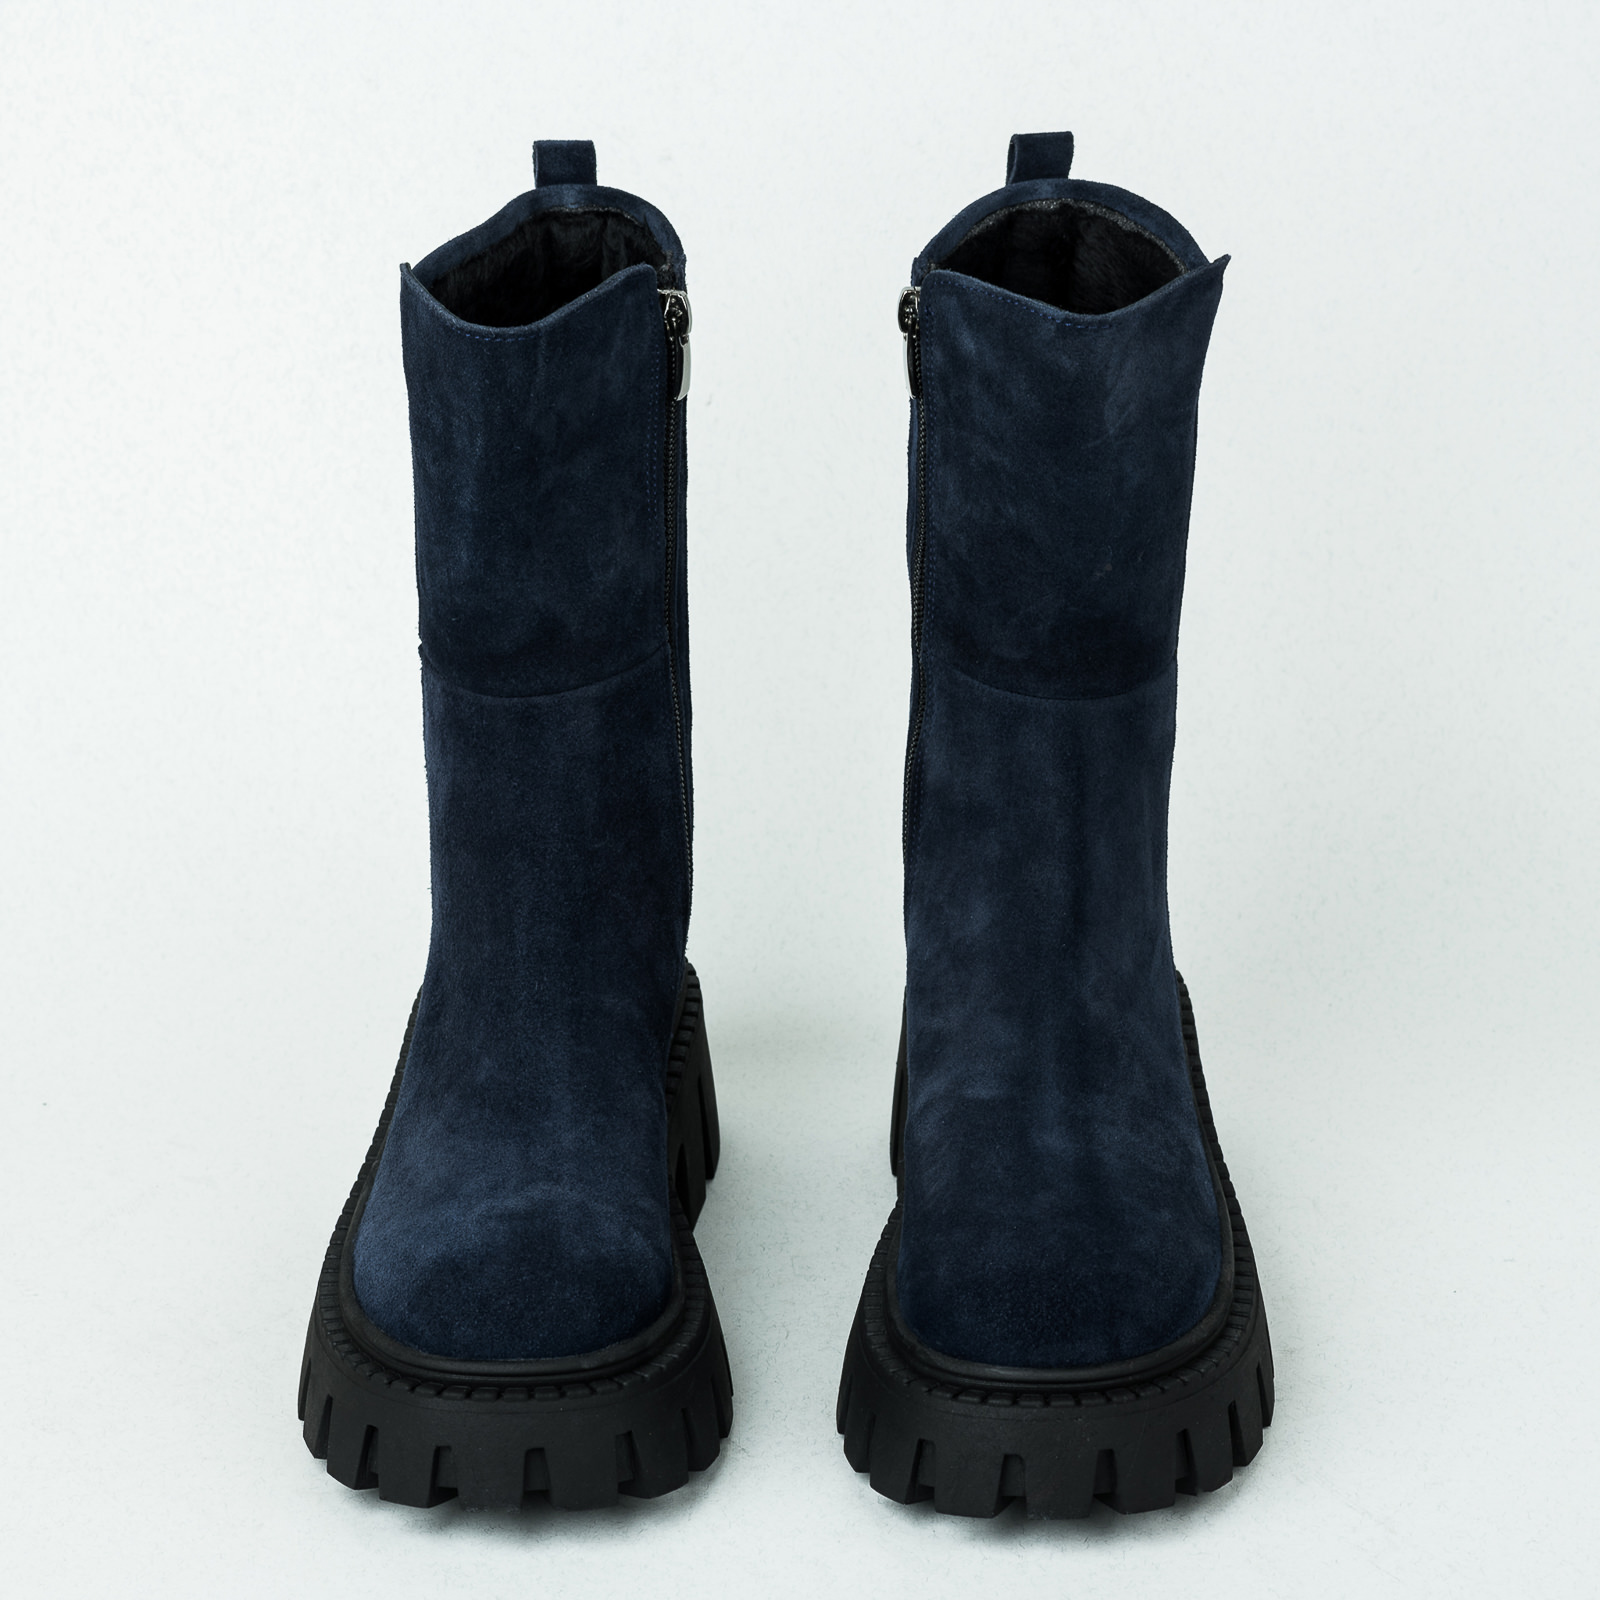 Leather booties B247 - NAVY